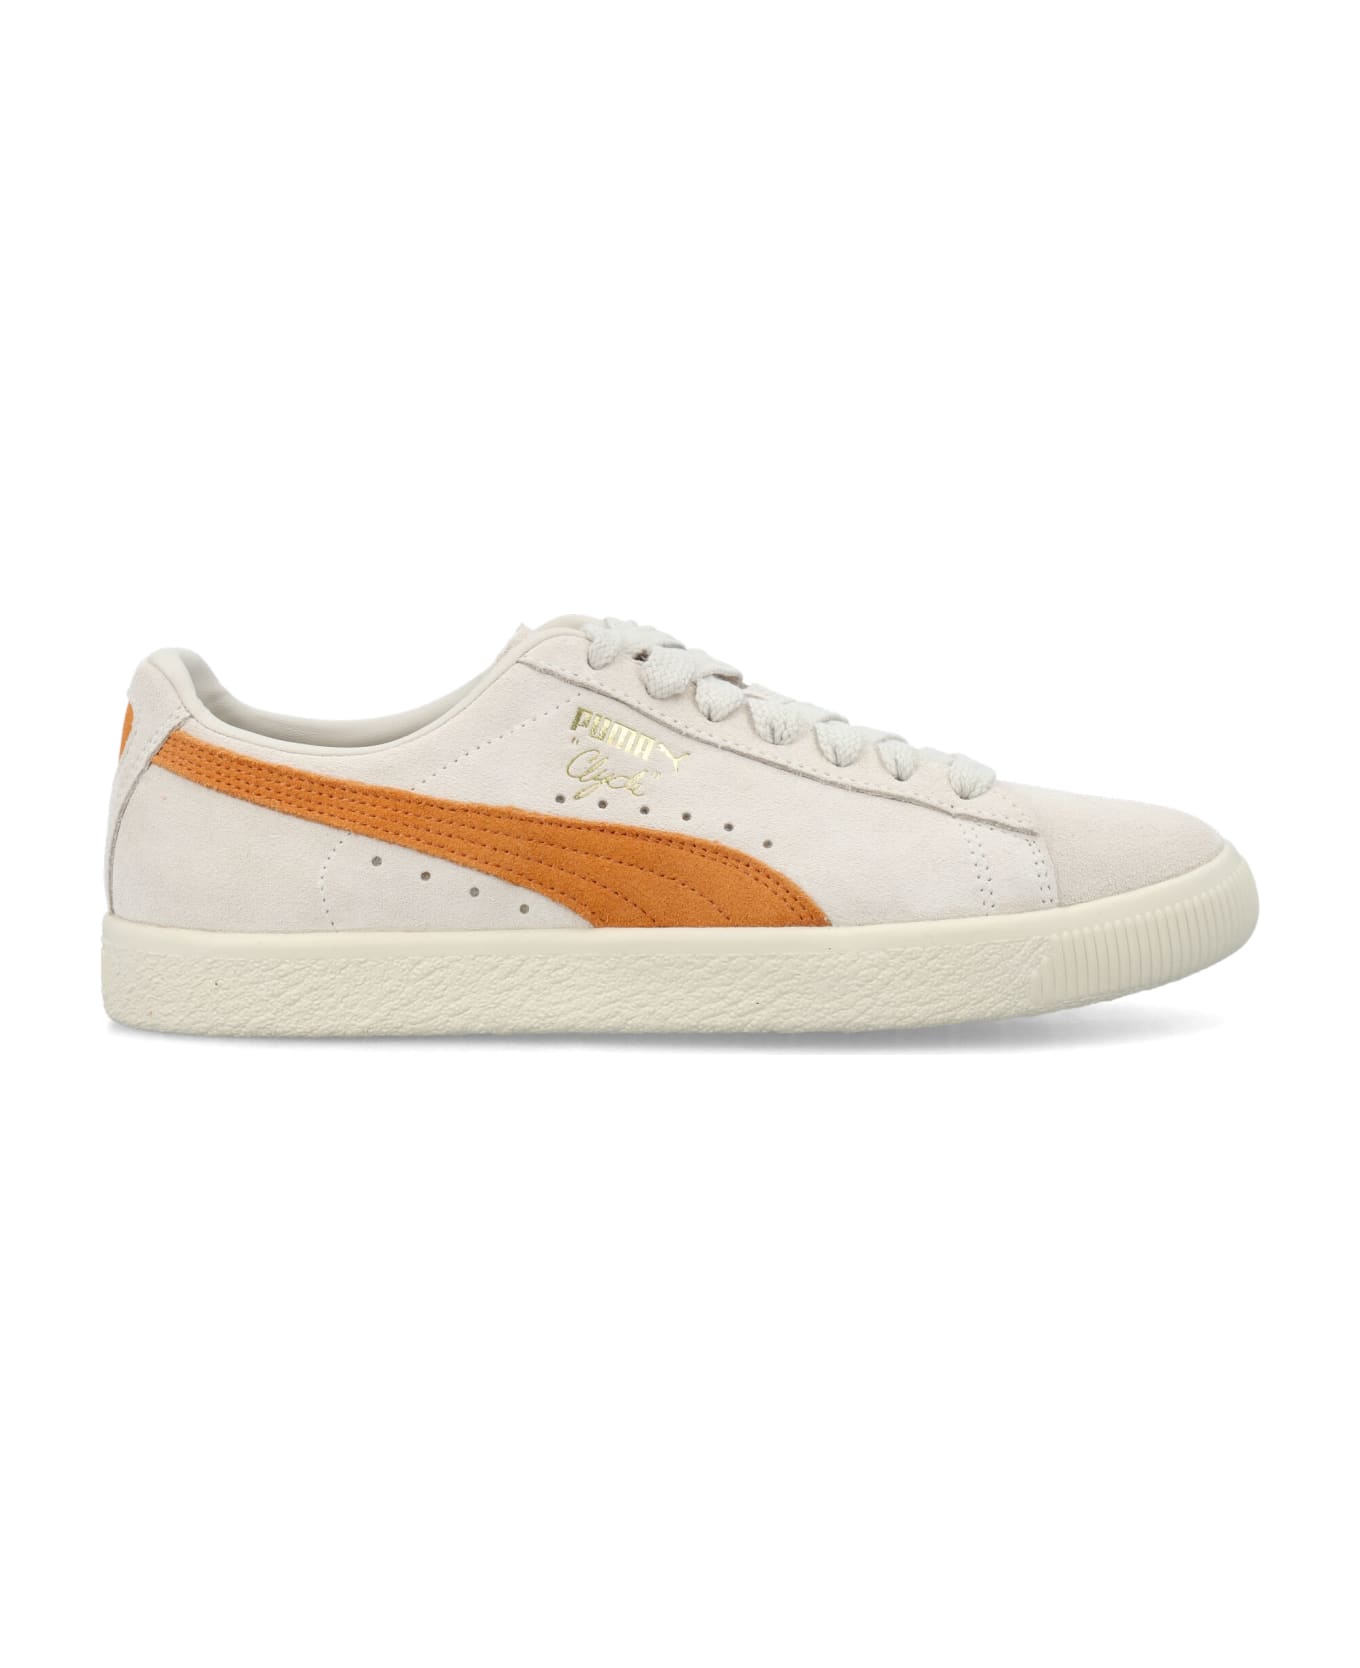 Puma Clyde Og Sneakers - FROSTED IVORY CLEMENTINE